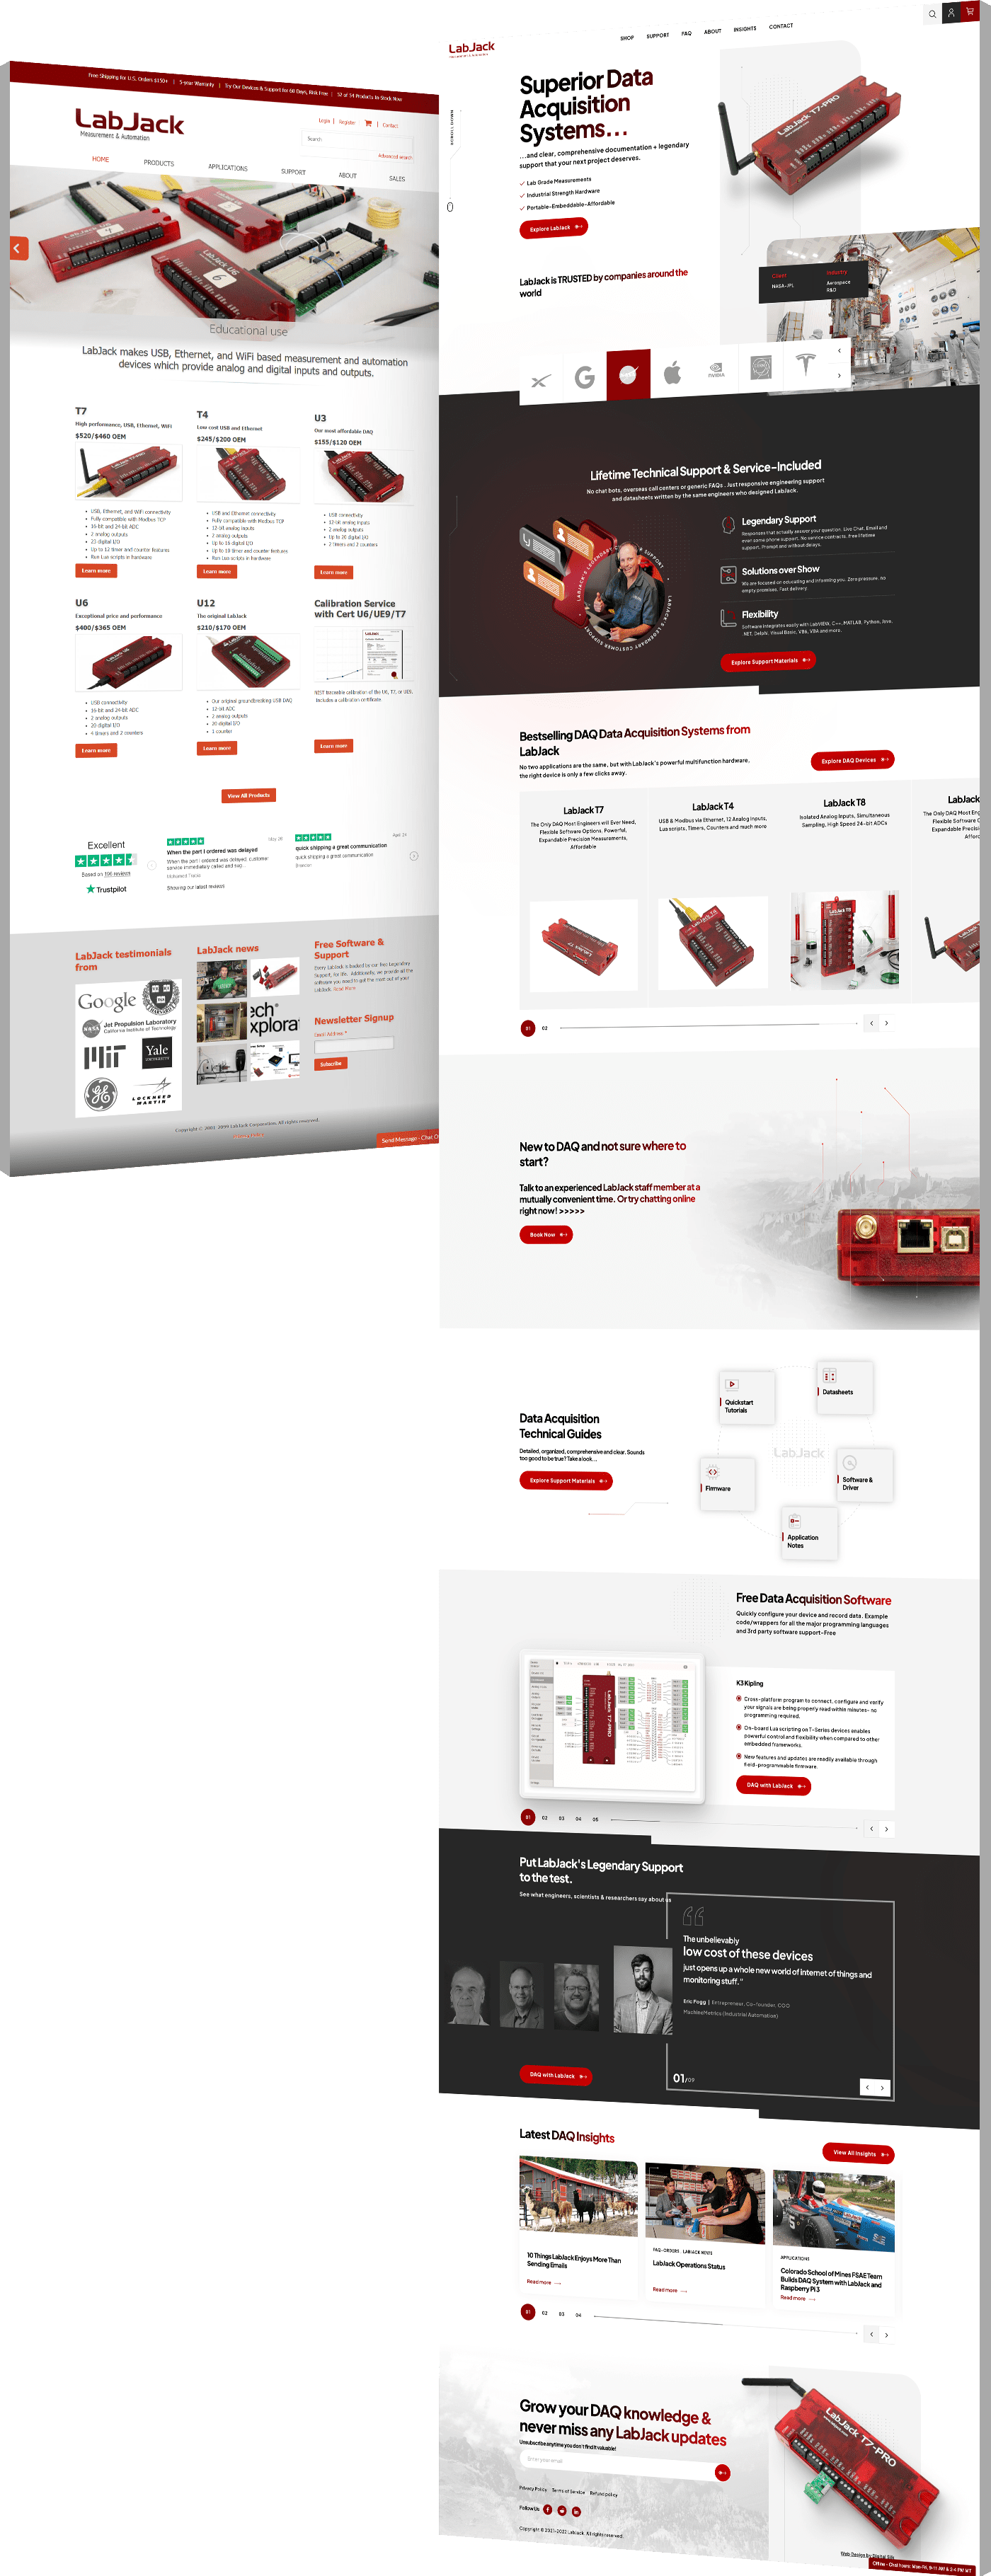 Web design before and after photos of LabJack